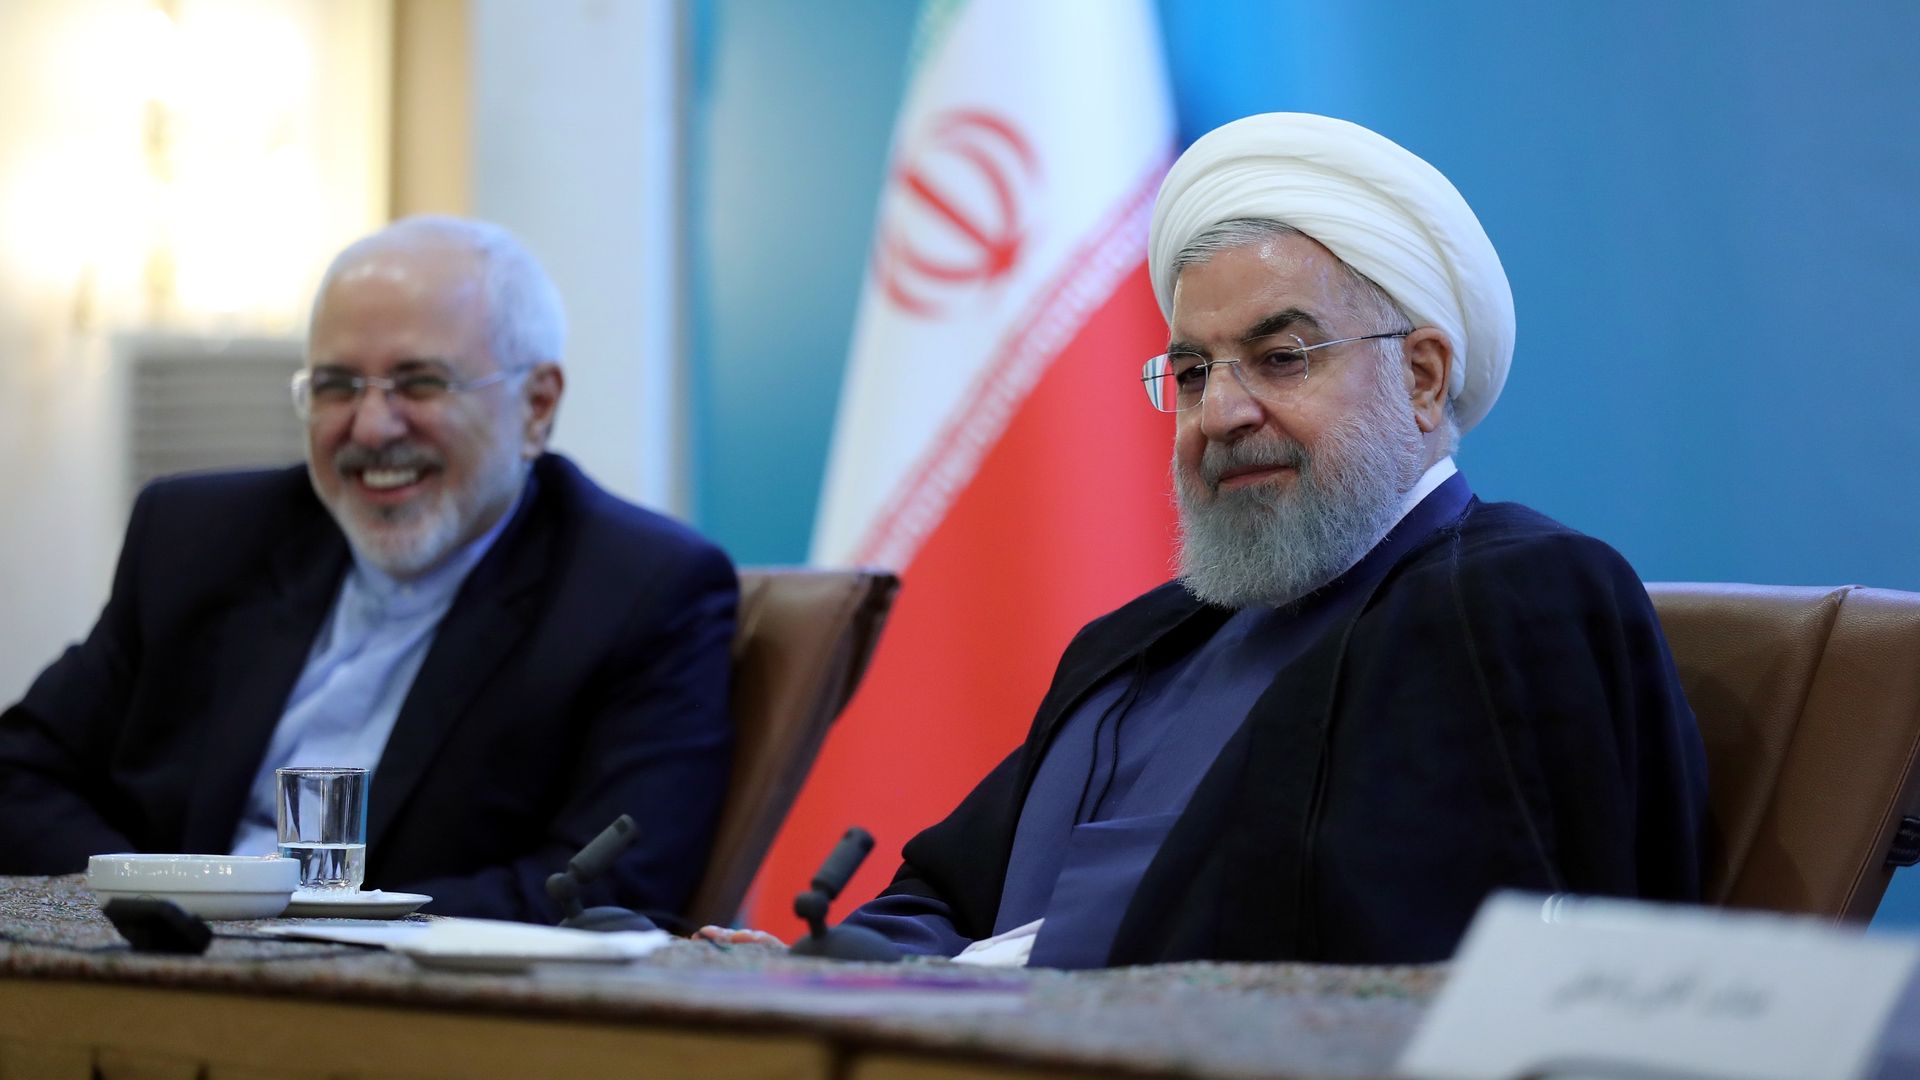 Iran's foreign minister Javad Zarif and president Hassan Rouhani